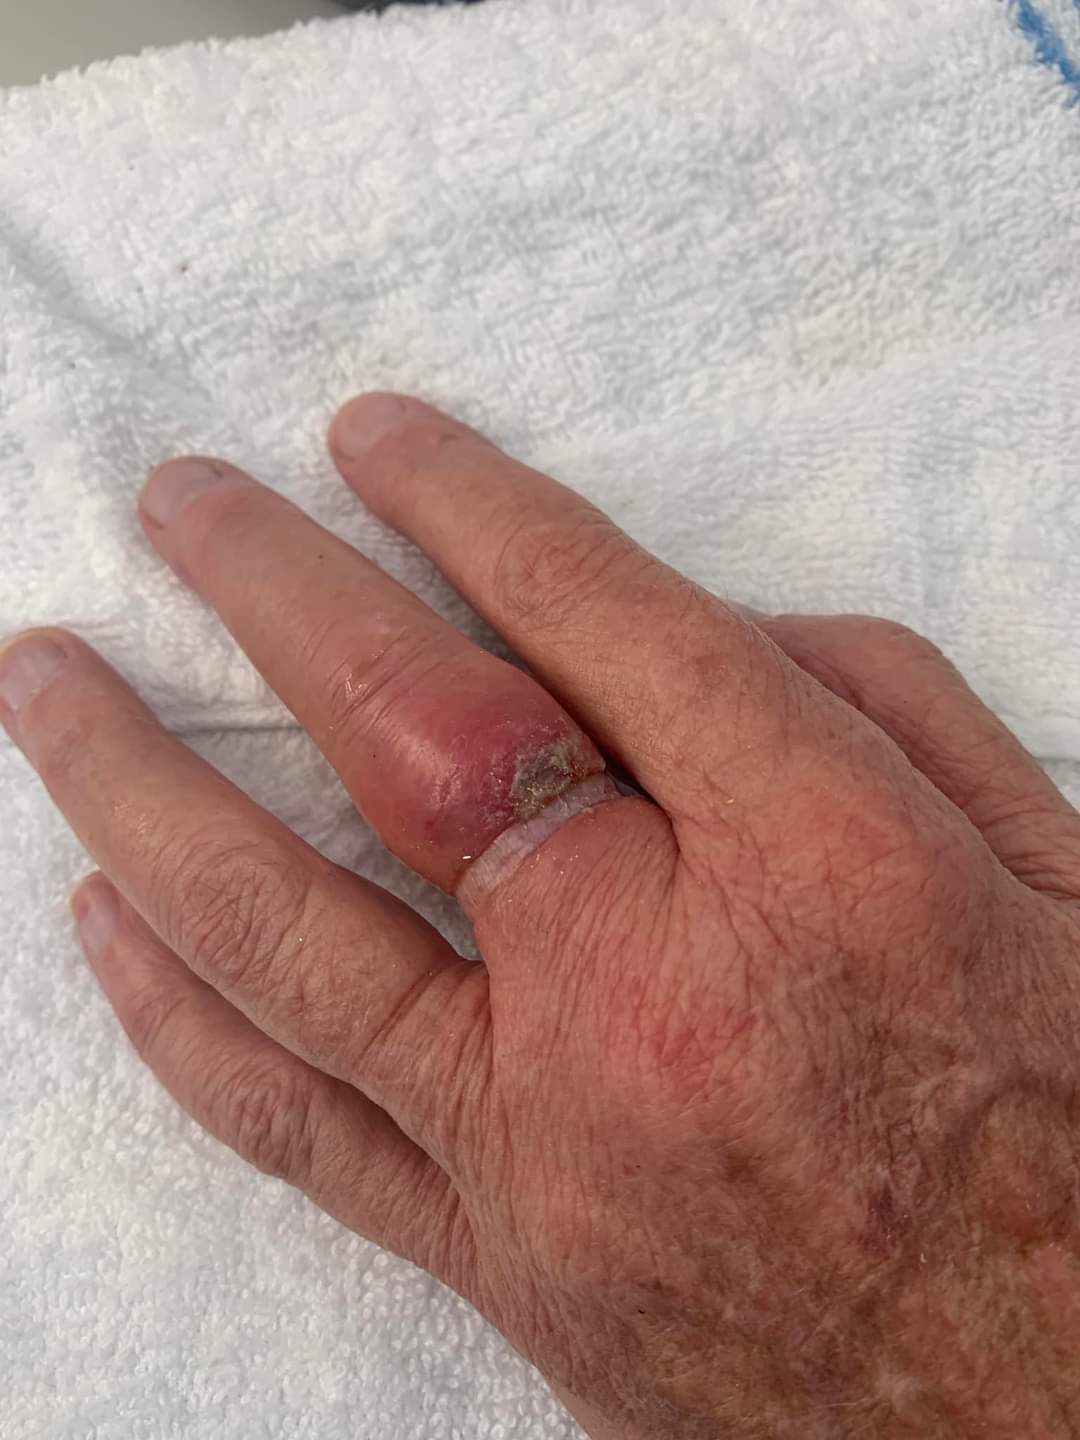 Read more about the article Elderly lady required emergency ring removal.